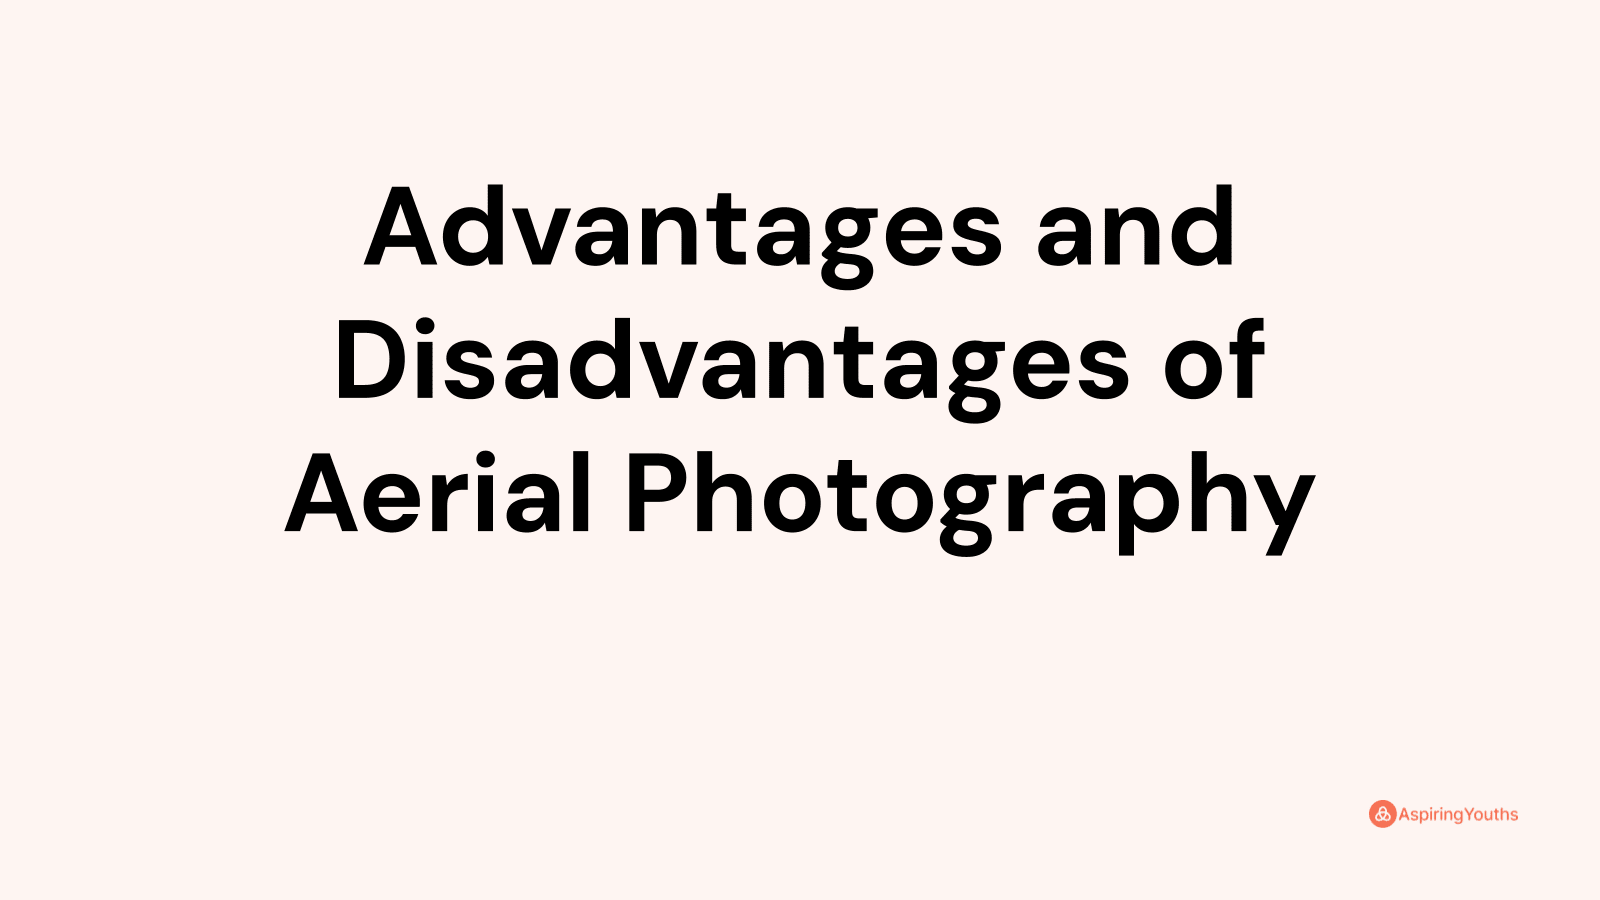 Advantages and disadvantages of Aerial Photography